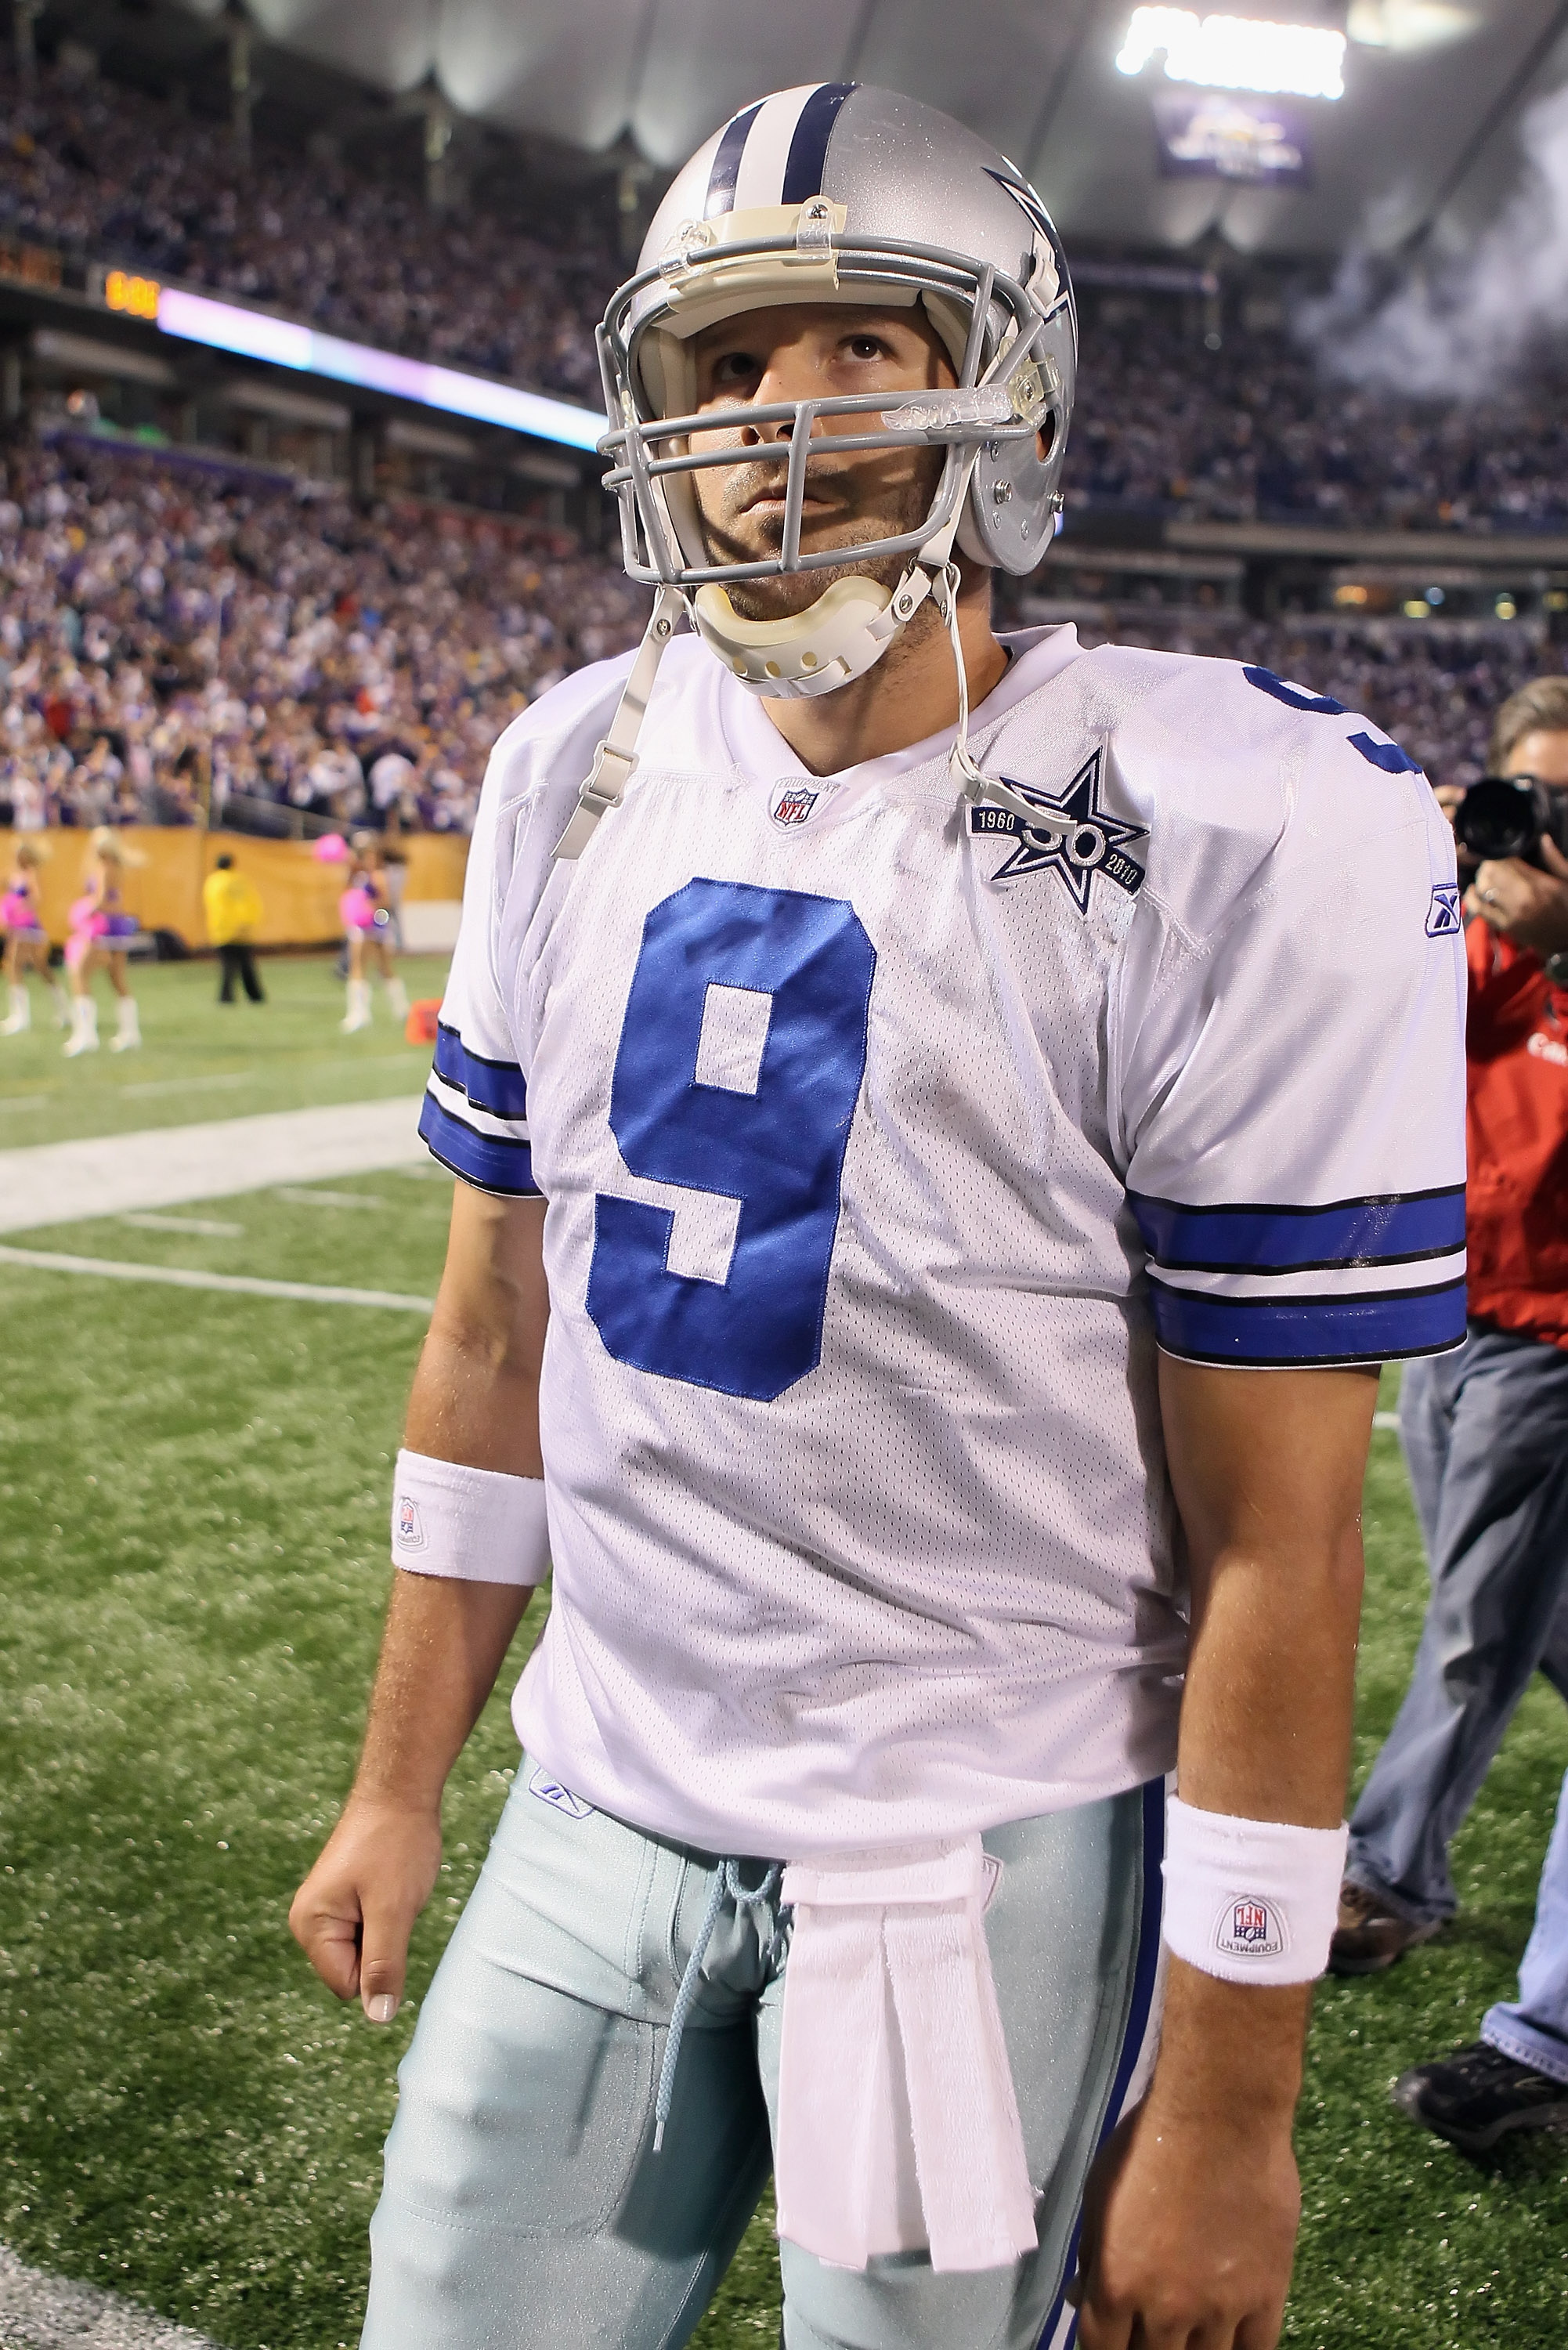 MINNEAPOLIS - OCTOBER 17:  Quarterback Tony Romo #9 of the Dallas Cowboys walks off the field following the game against the Minnesota Vikings at Mall of America Field on October 17, 2010 in Minneapolis, Minnesota. The Vikings defeated the Cowboys 24-21.